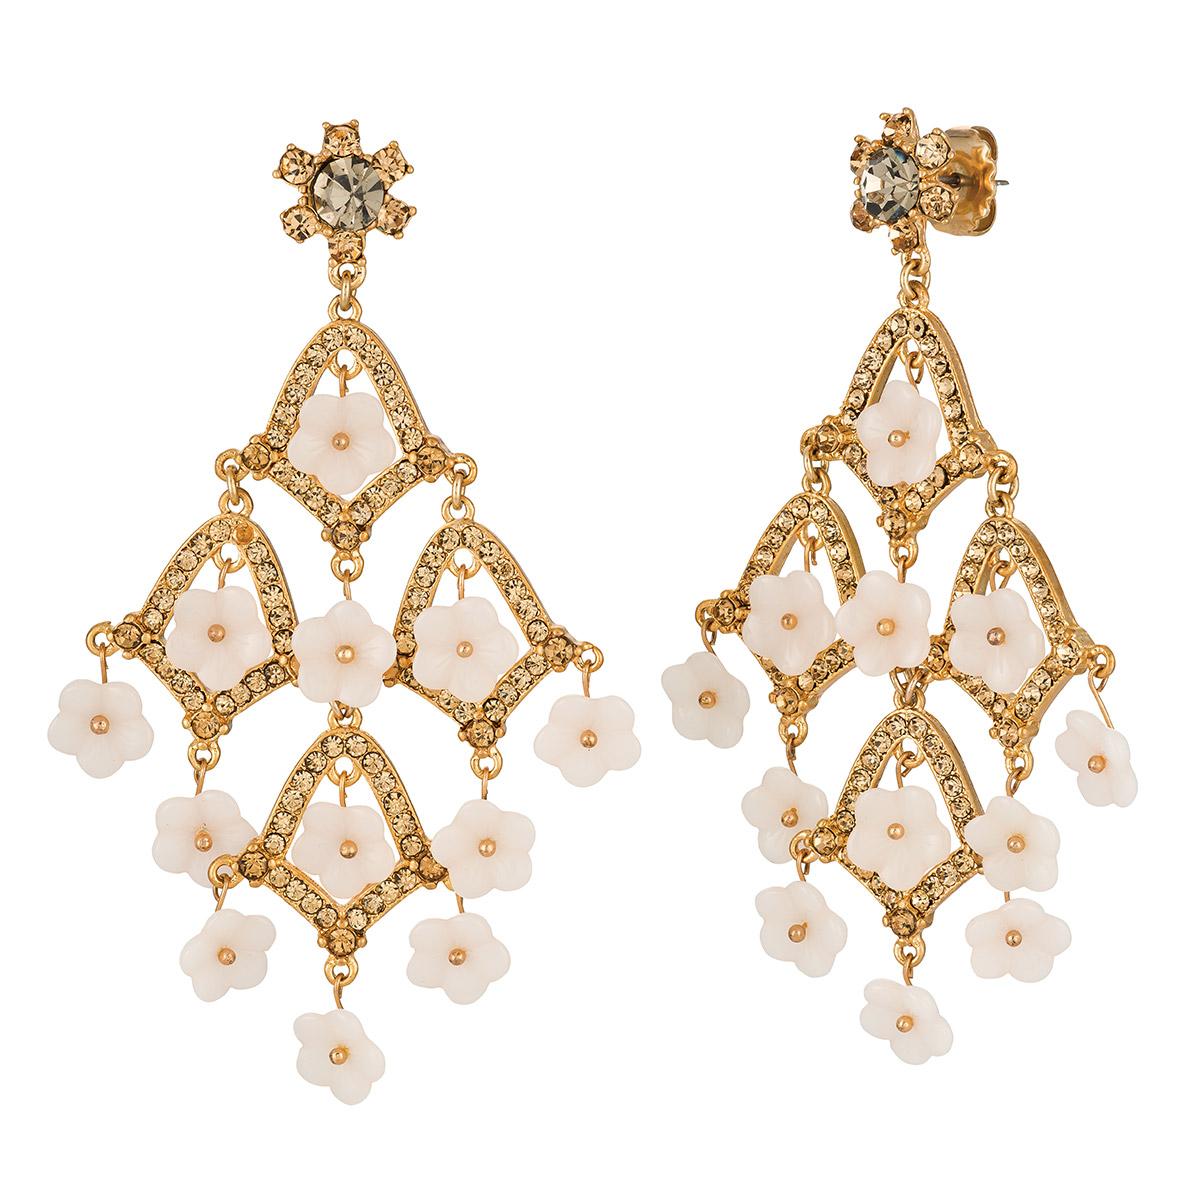 PLEASE NOTE: The pieces available are not vintage and are not reproductions.
CINER uses original models to produce our jewelry today. 
If you would like to custom order these earrings, please message us!

The perfect chandelier for every season,